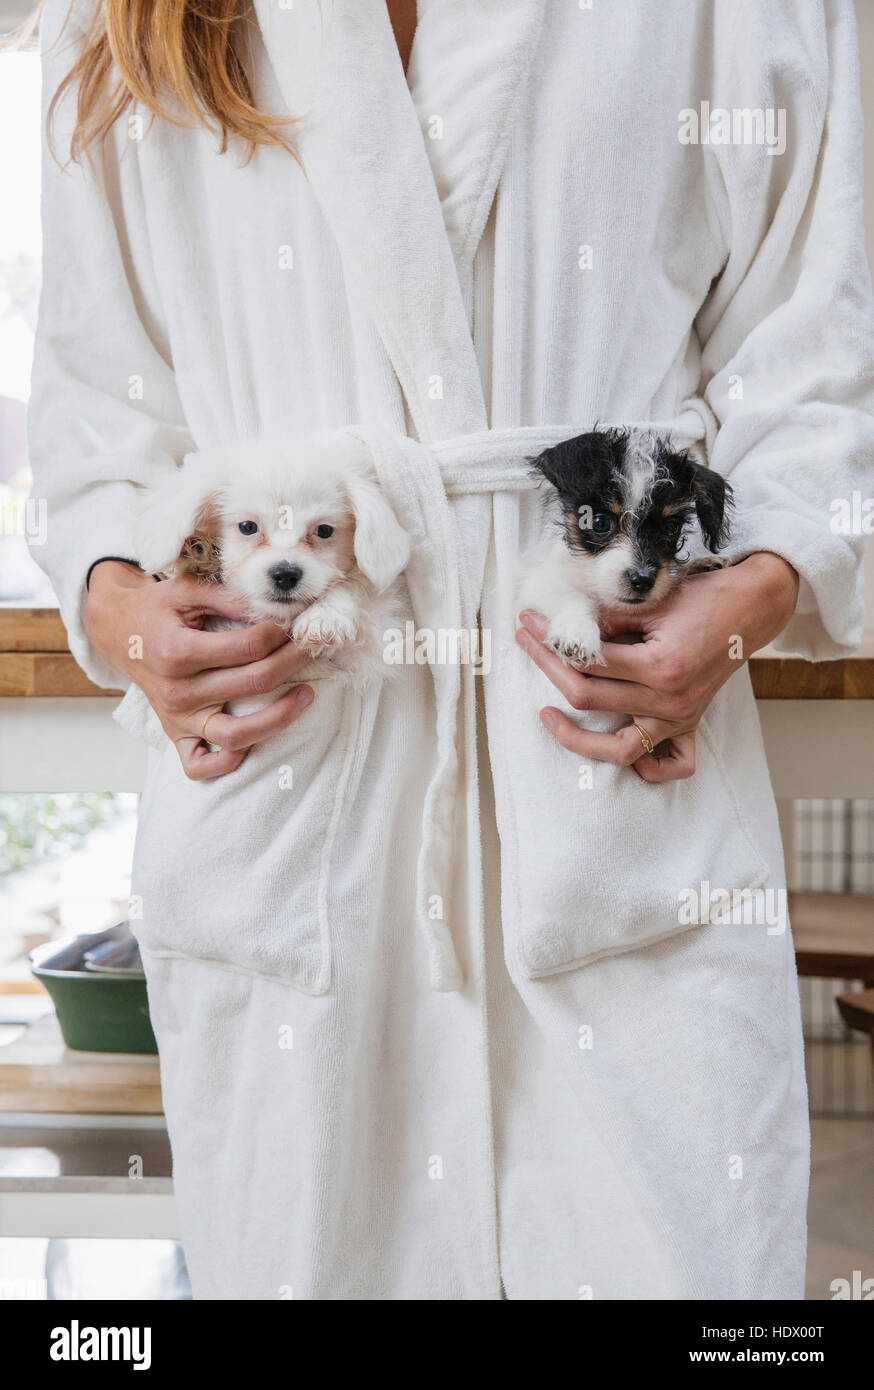 Caucasian woman wearing bathrobe carrying puppies in pockets Stock Photo